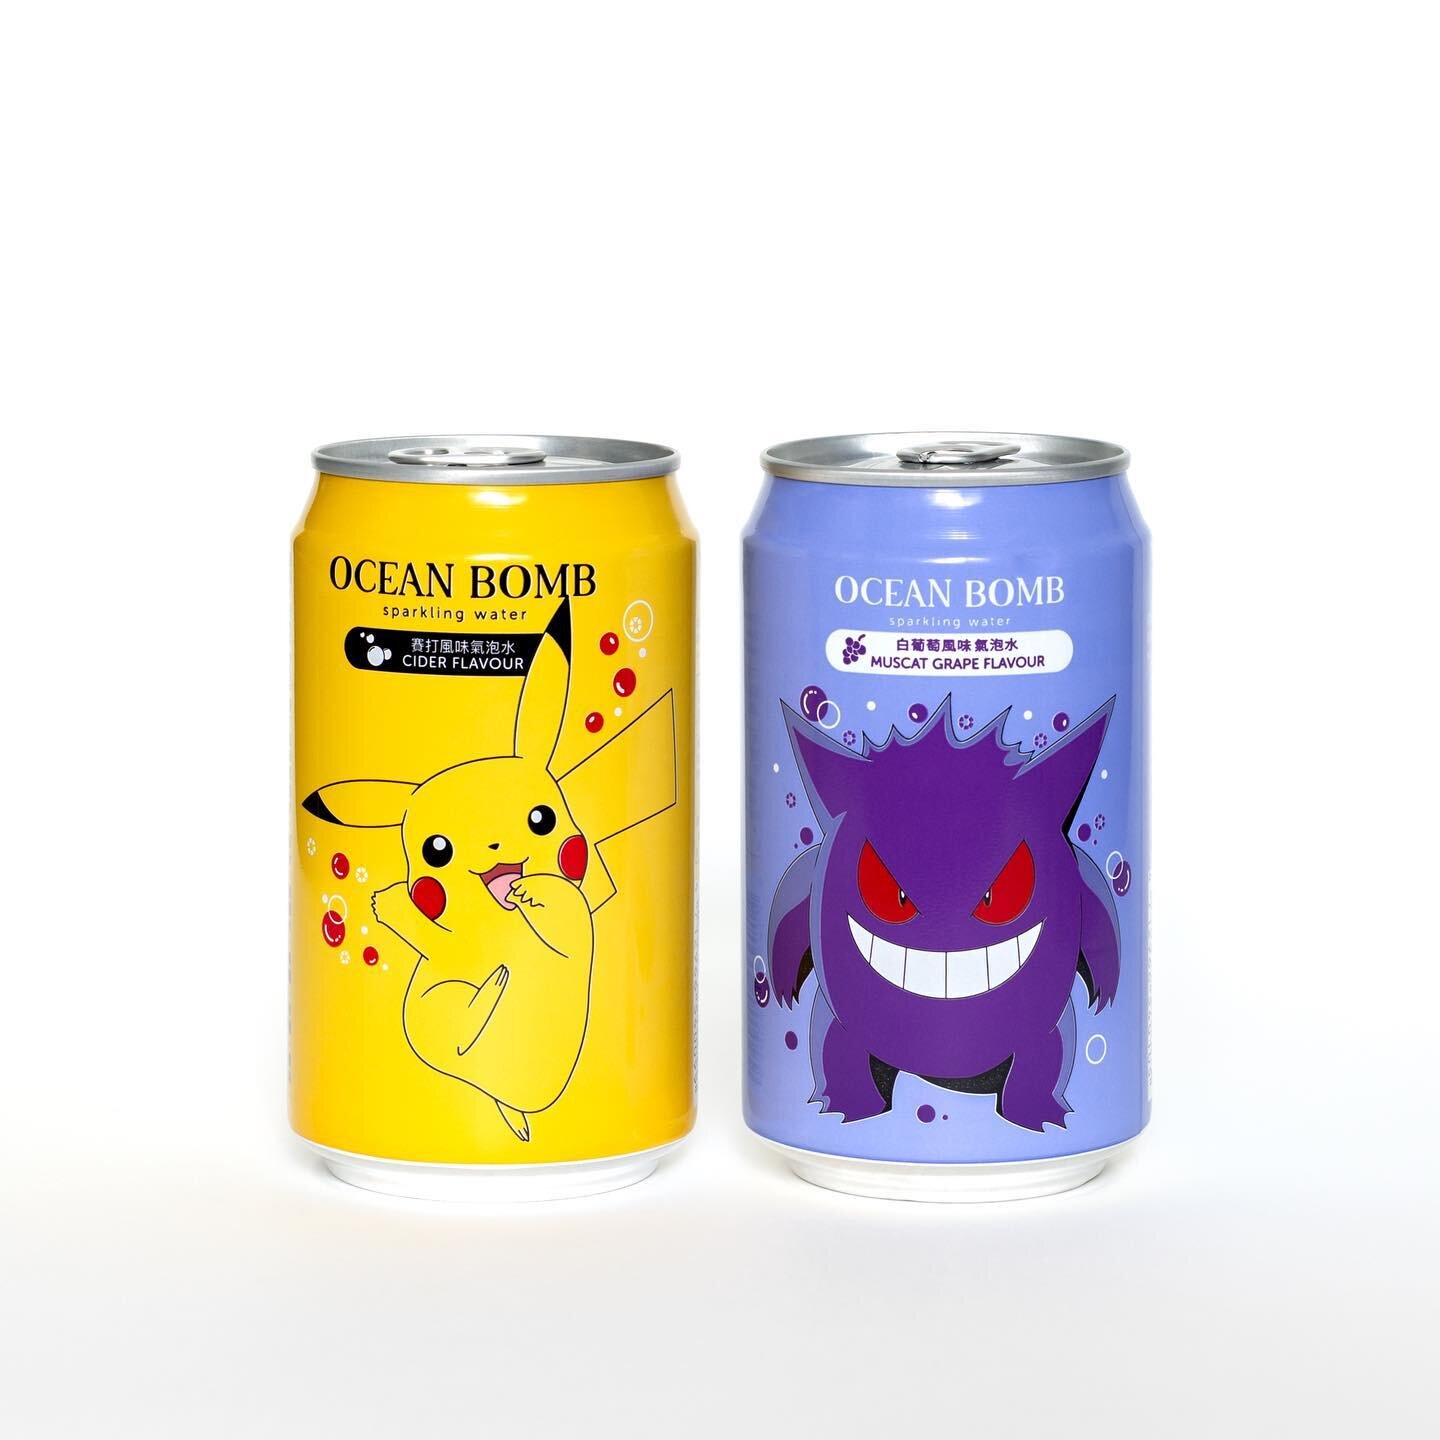 It&rsquo;s finally here! Very honored to have contributed to the theatrical marketing and home entertainment campaigns for Pok&eacute;mon: Detective Pikachu. Go see it now! ⚡️⚡️⚡️⚡️⚡️
#pokemon #pikachu #detectivepikachu #gengar #soda #productphotogra